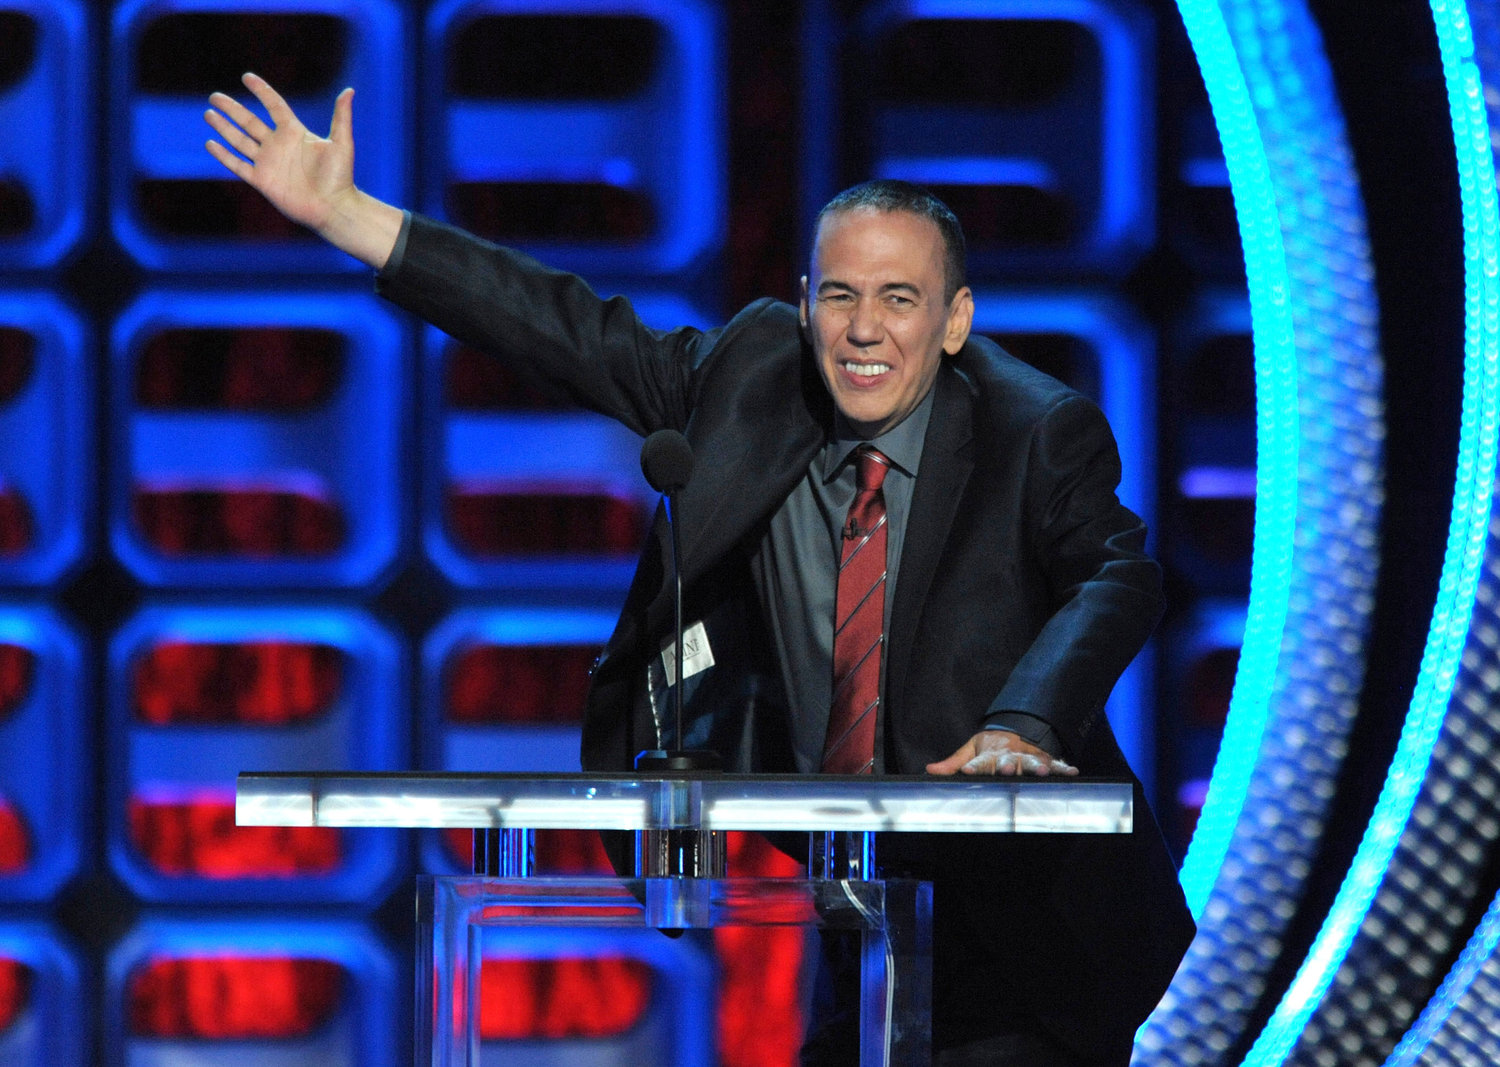 FILE - Gilbert Gottfried performs at the Comedy Central “Roast of Roseanne” in Los Angeles on Aug. 4, 2012. Gottfried‚Äôs publicist and longtime friend Glenn Schwartz said Gottfried, an actor and legendary standup comic known for his abrasive voice and crude jokes, died Tuesday, April 12, 2022. He was 67. (Photo by John Shearer/Invision/AP, File)